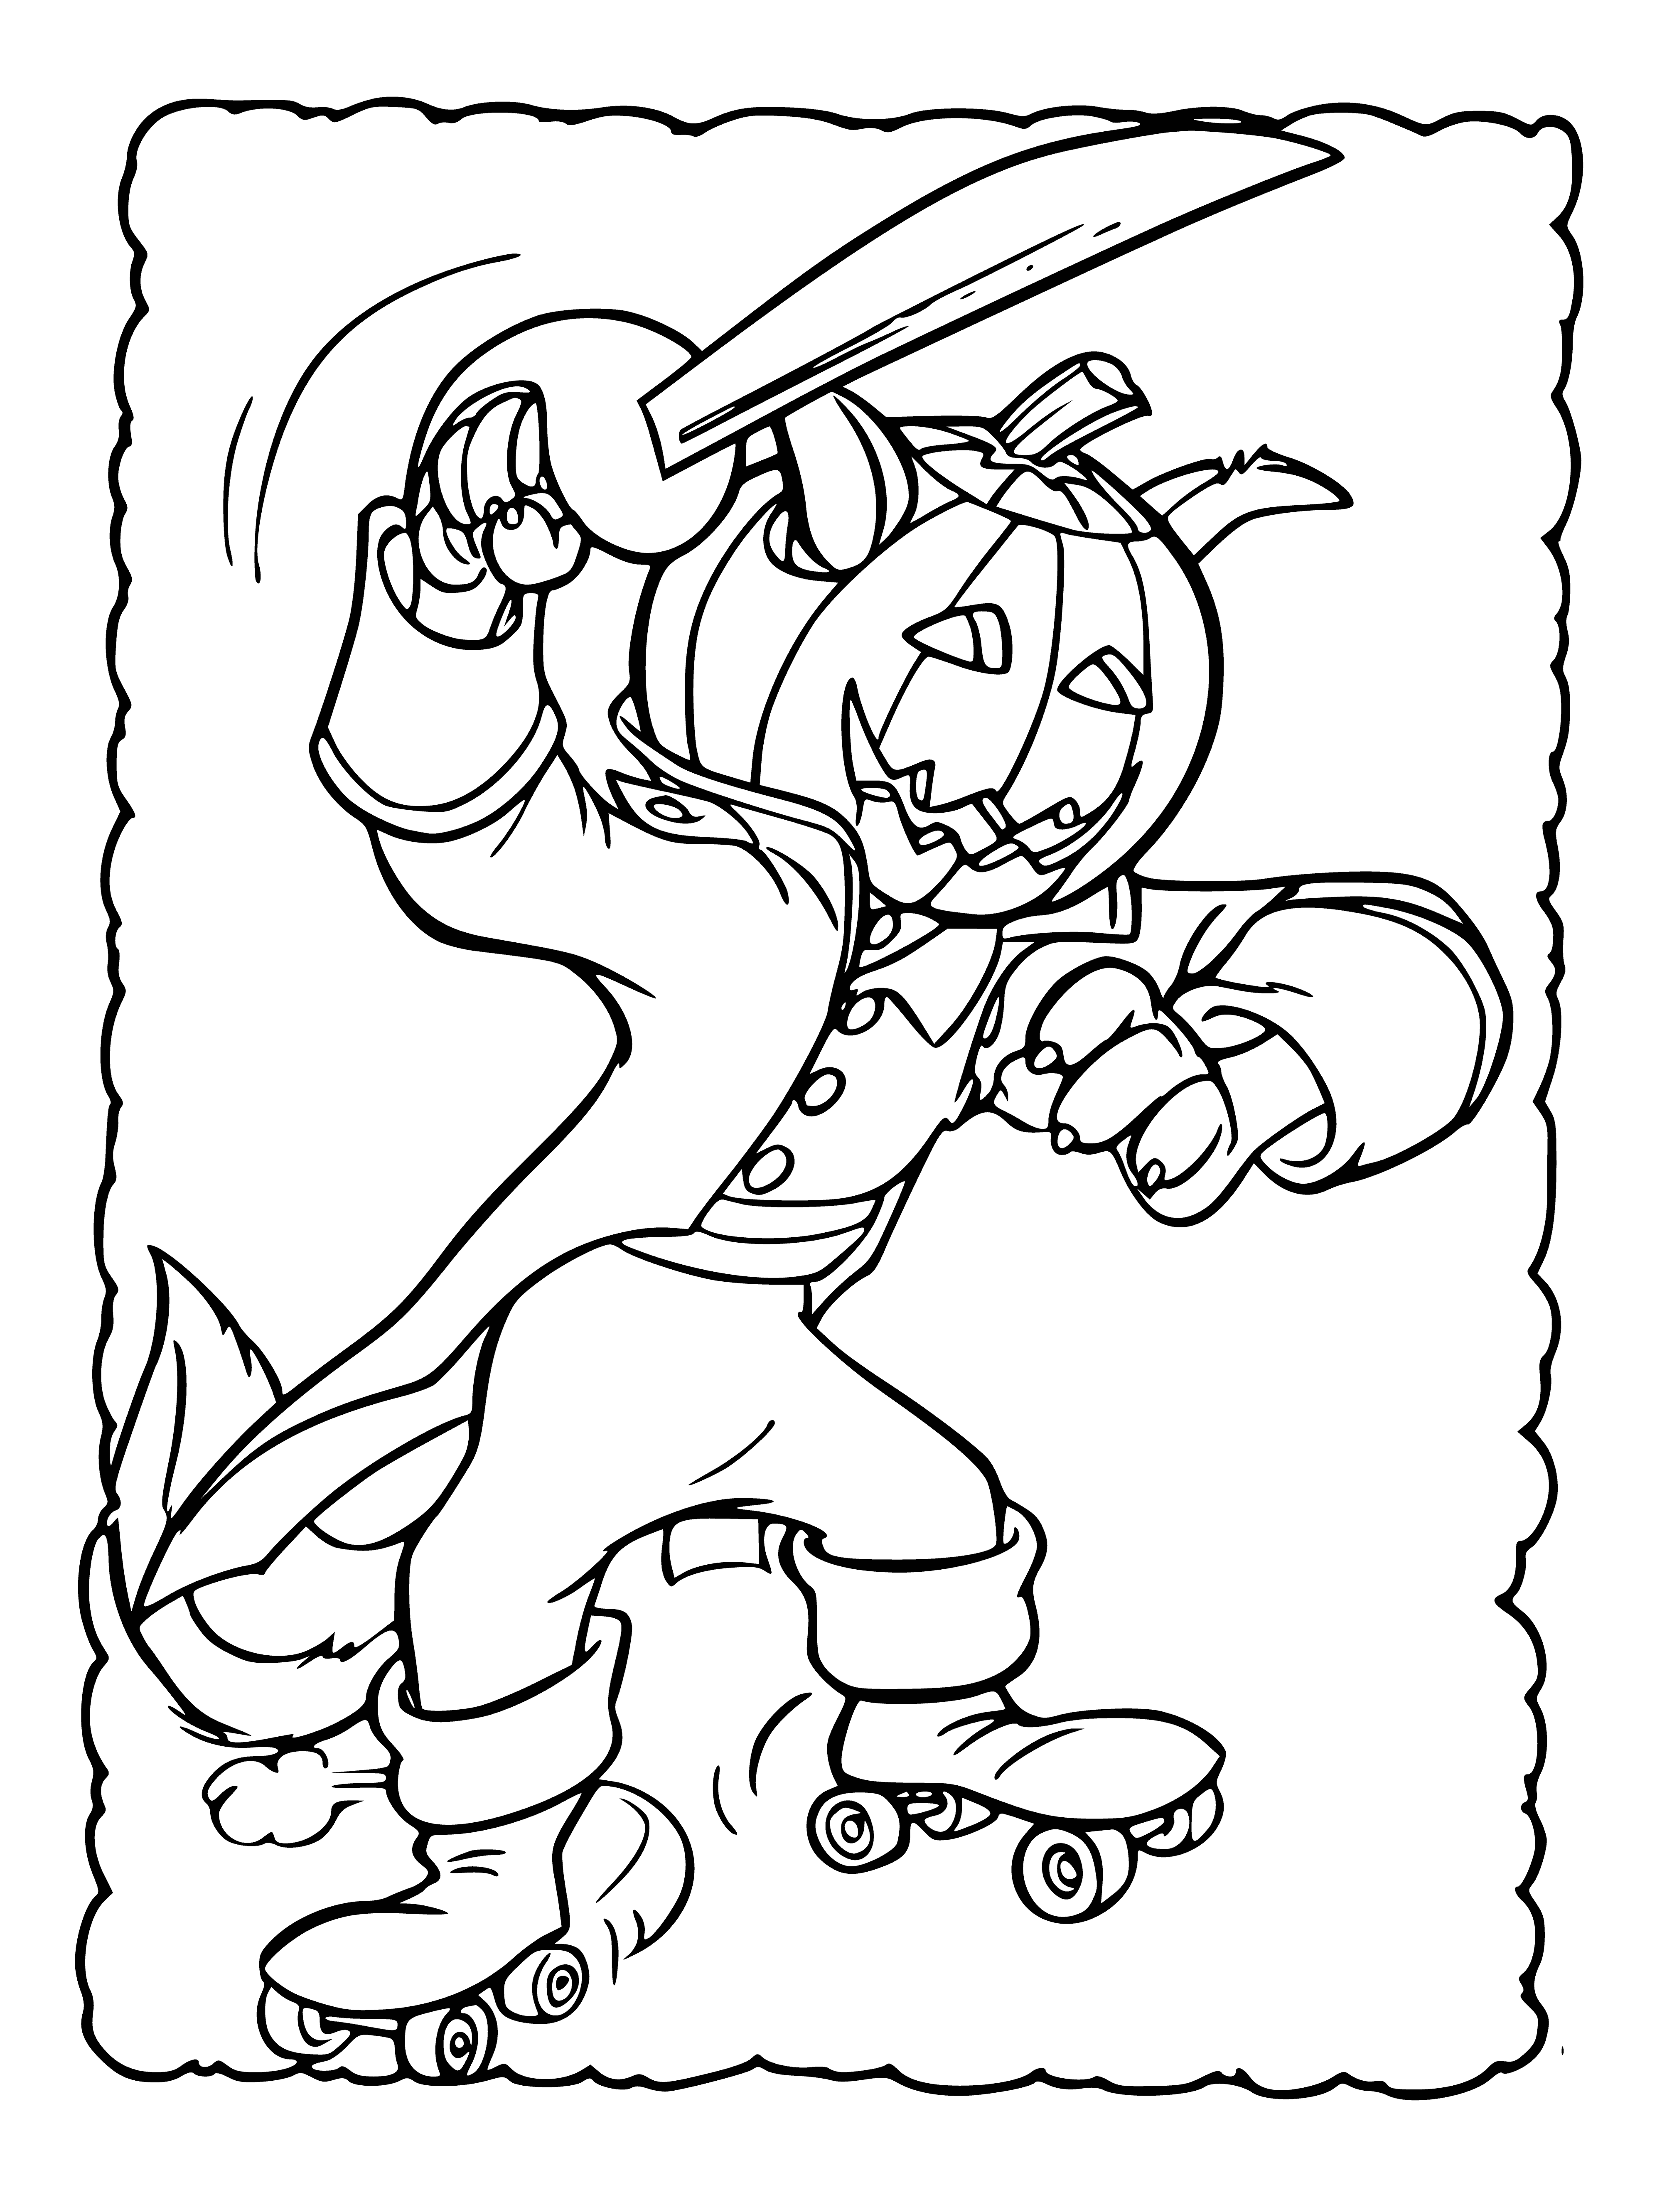 coloring page: Red-haired, bearded head pirate stands on a pirate ship deck next to a large barrel wearing blue shirt, red scarf & brown belt with sword, with black eye-patch.